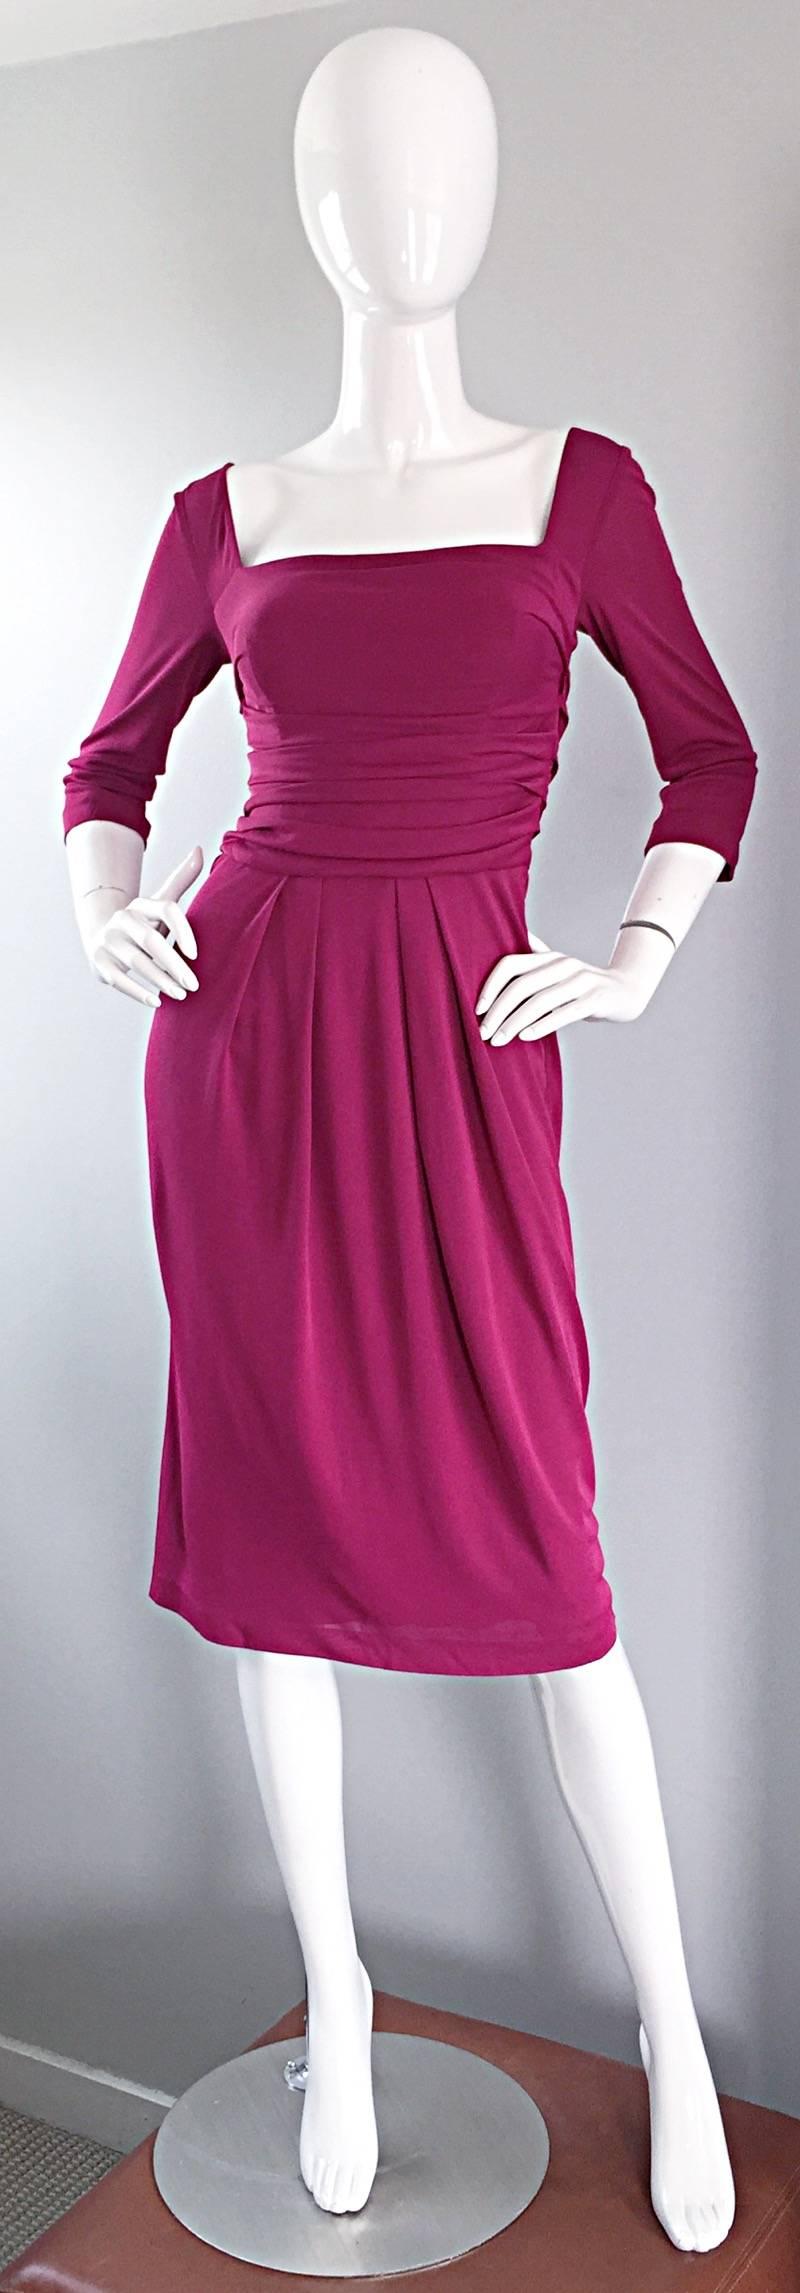 Beautiful brand new with tags 90s ALBERTA FERRETTI raspberry pink jersey dress! 3/4 sleeves make this beauty easy to wear all year. Beautiful drapes and pleats that really flatter the body. Hidden zipper up the side, with hook-and-eye closure. The